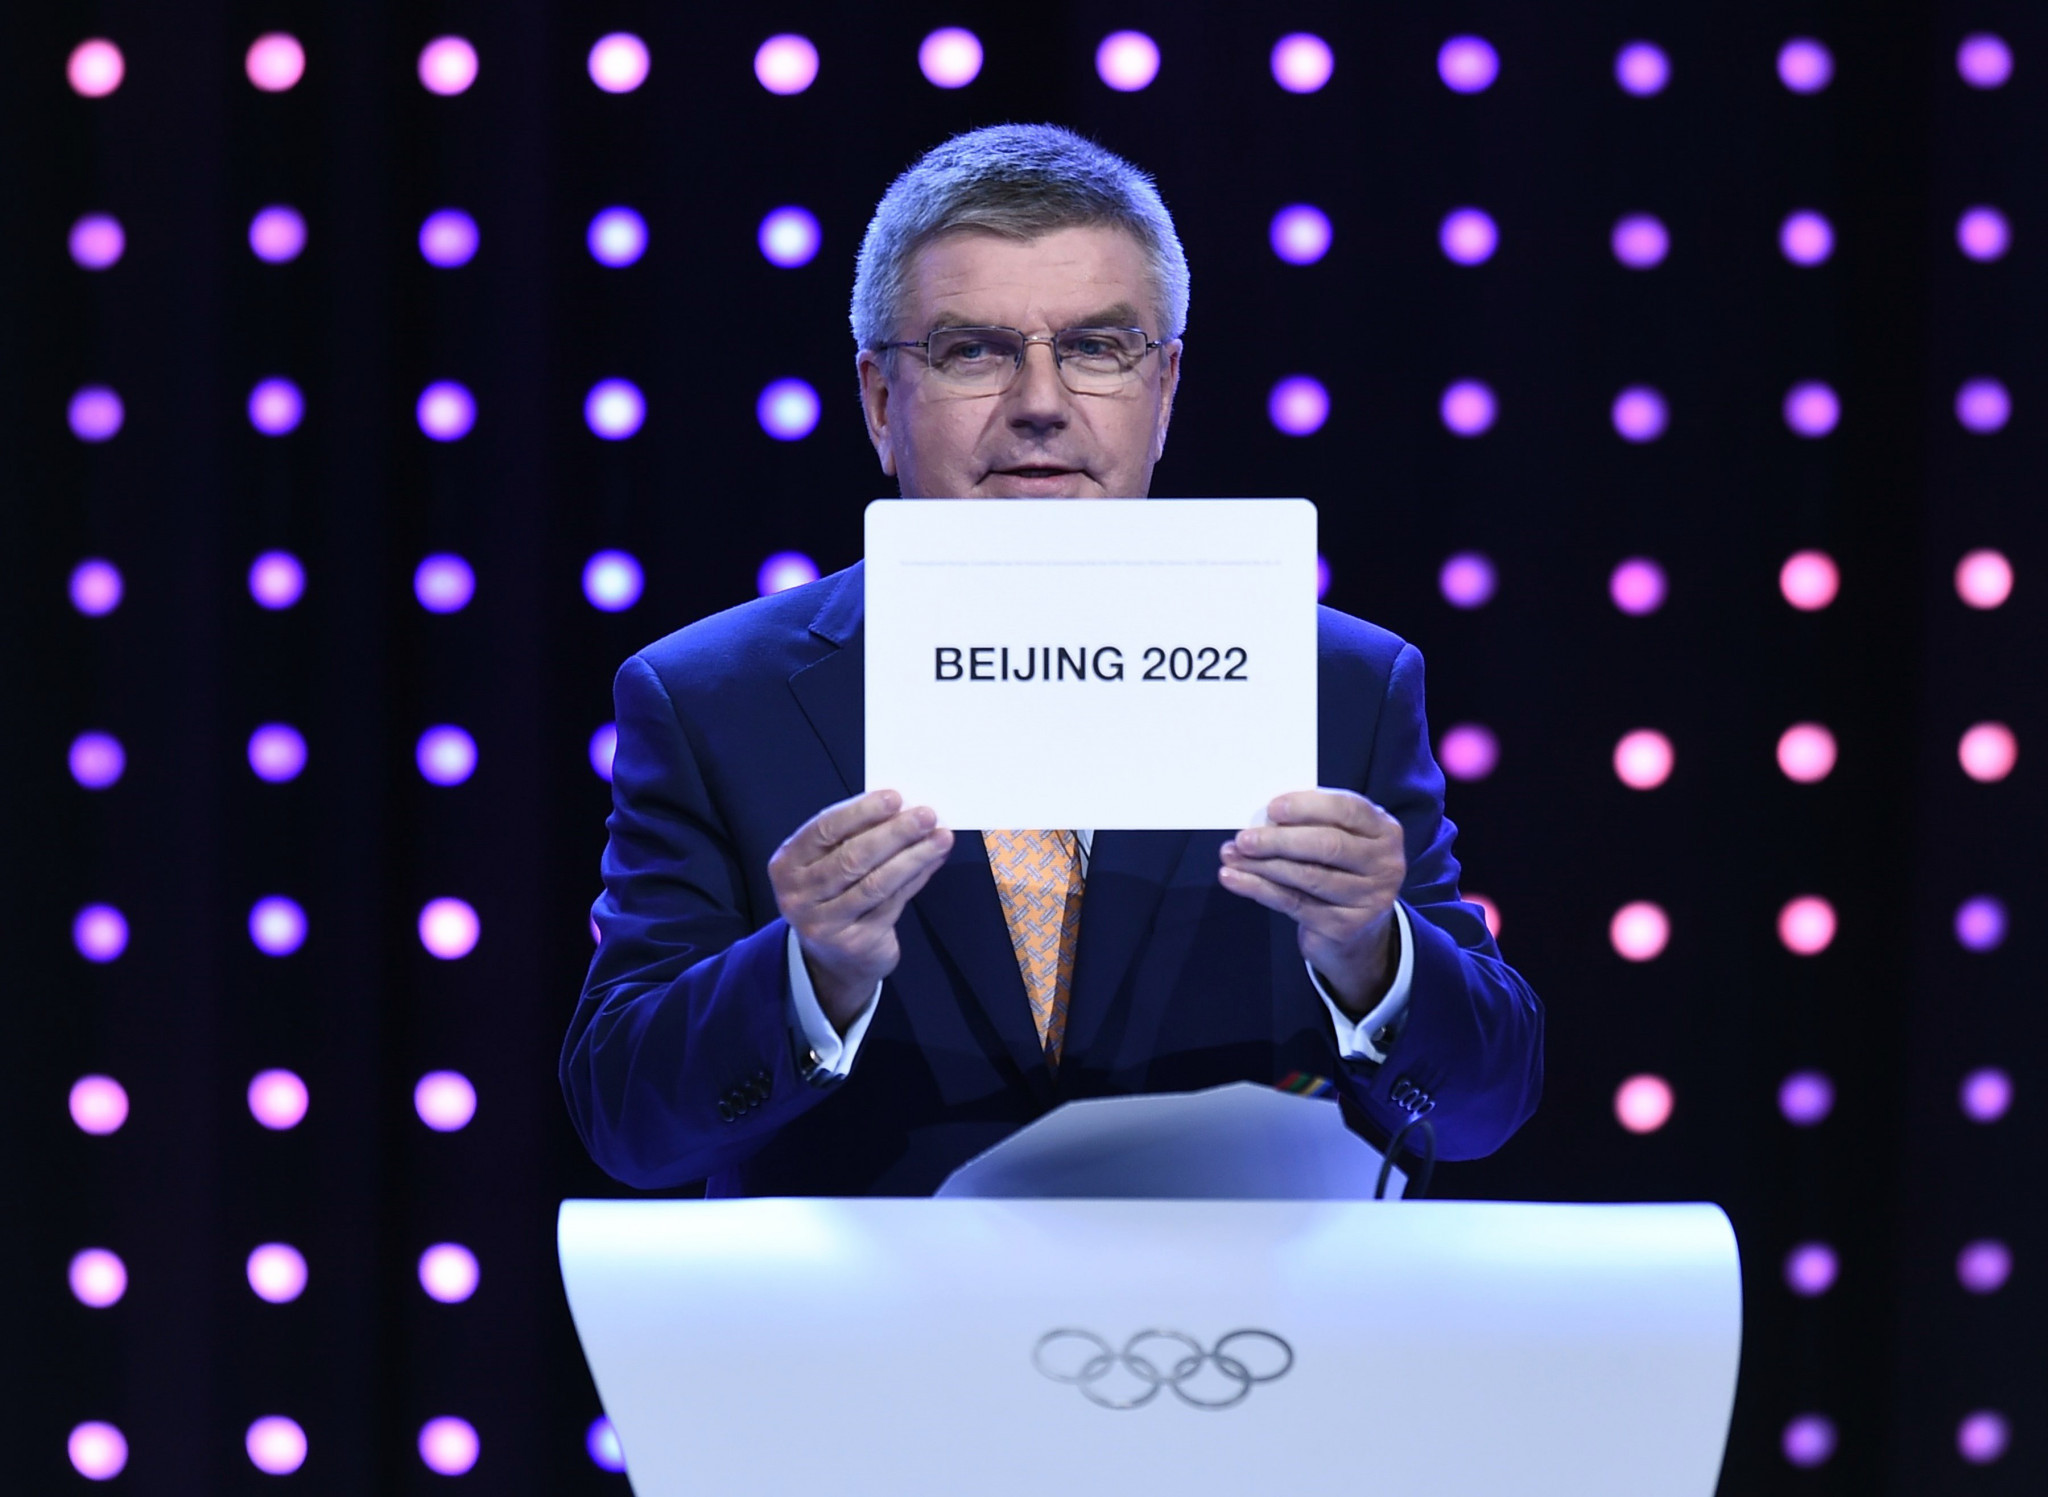 IOC President Thomas Bach revealed Beijing as hosts of the 2022 Winter Olympic and Paralympic Games at the 2015 IOC Session in Kuala Lumpur ©Getty Images